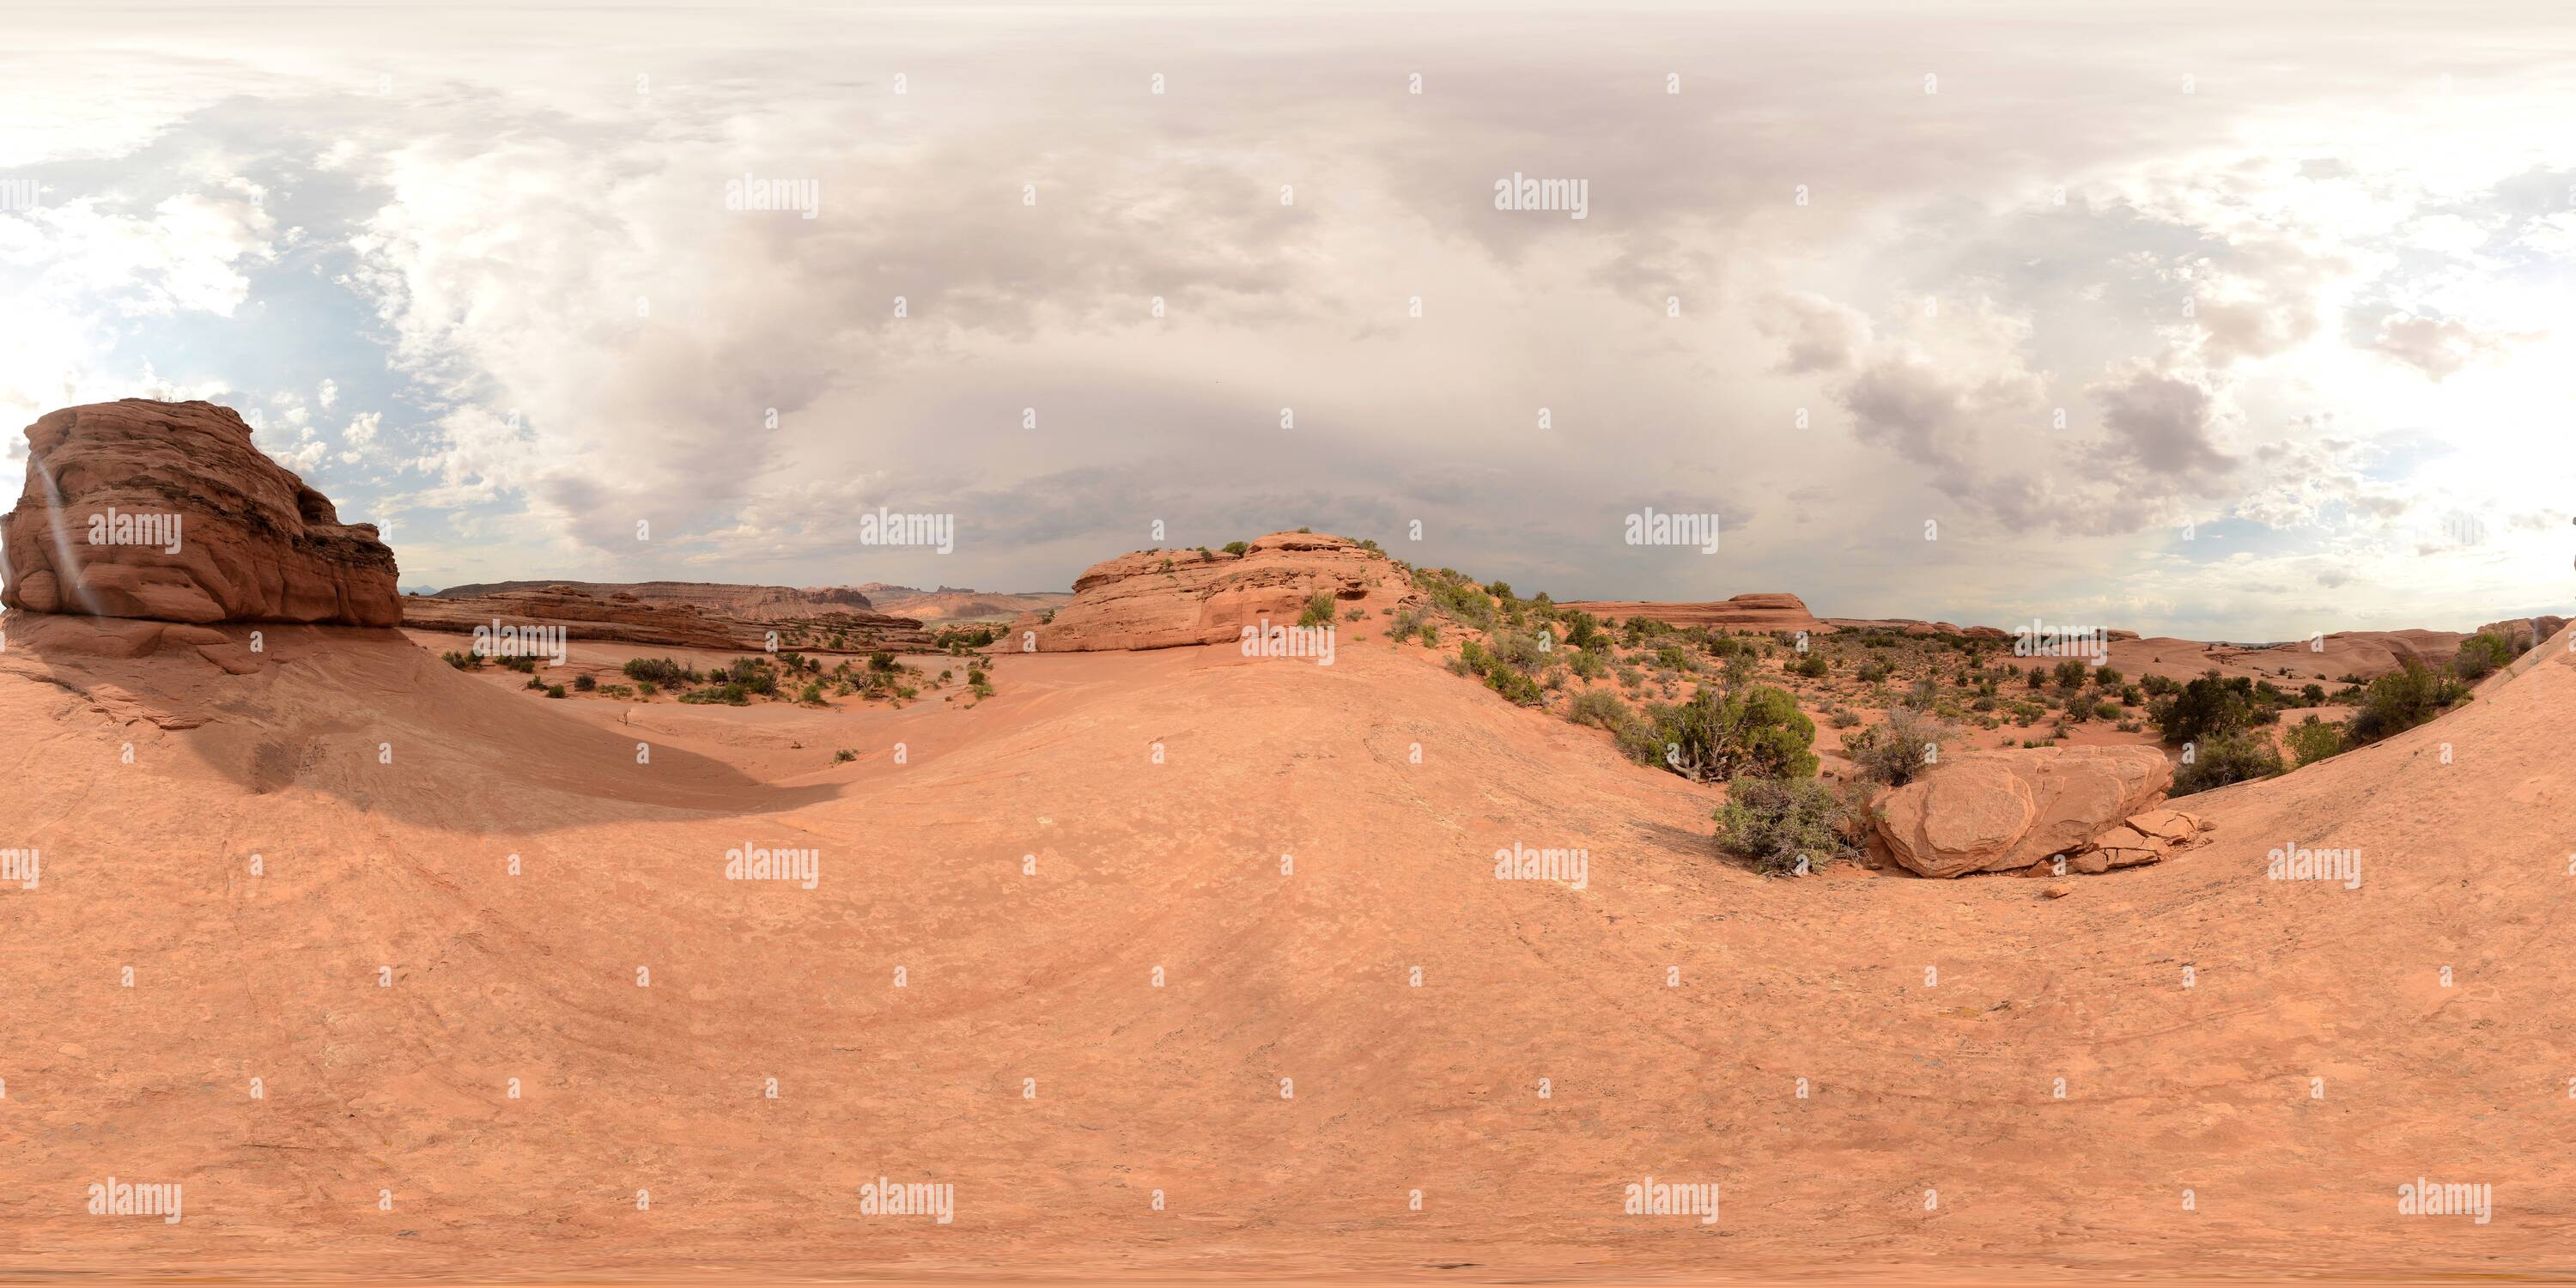 360 degree panoramic view of Arches National Park, Delicate Arch Trail viewpoint